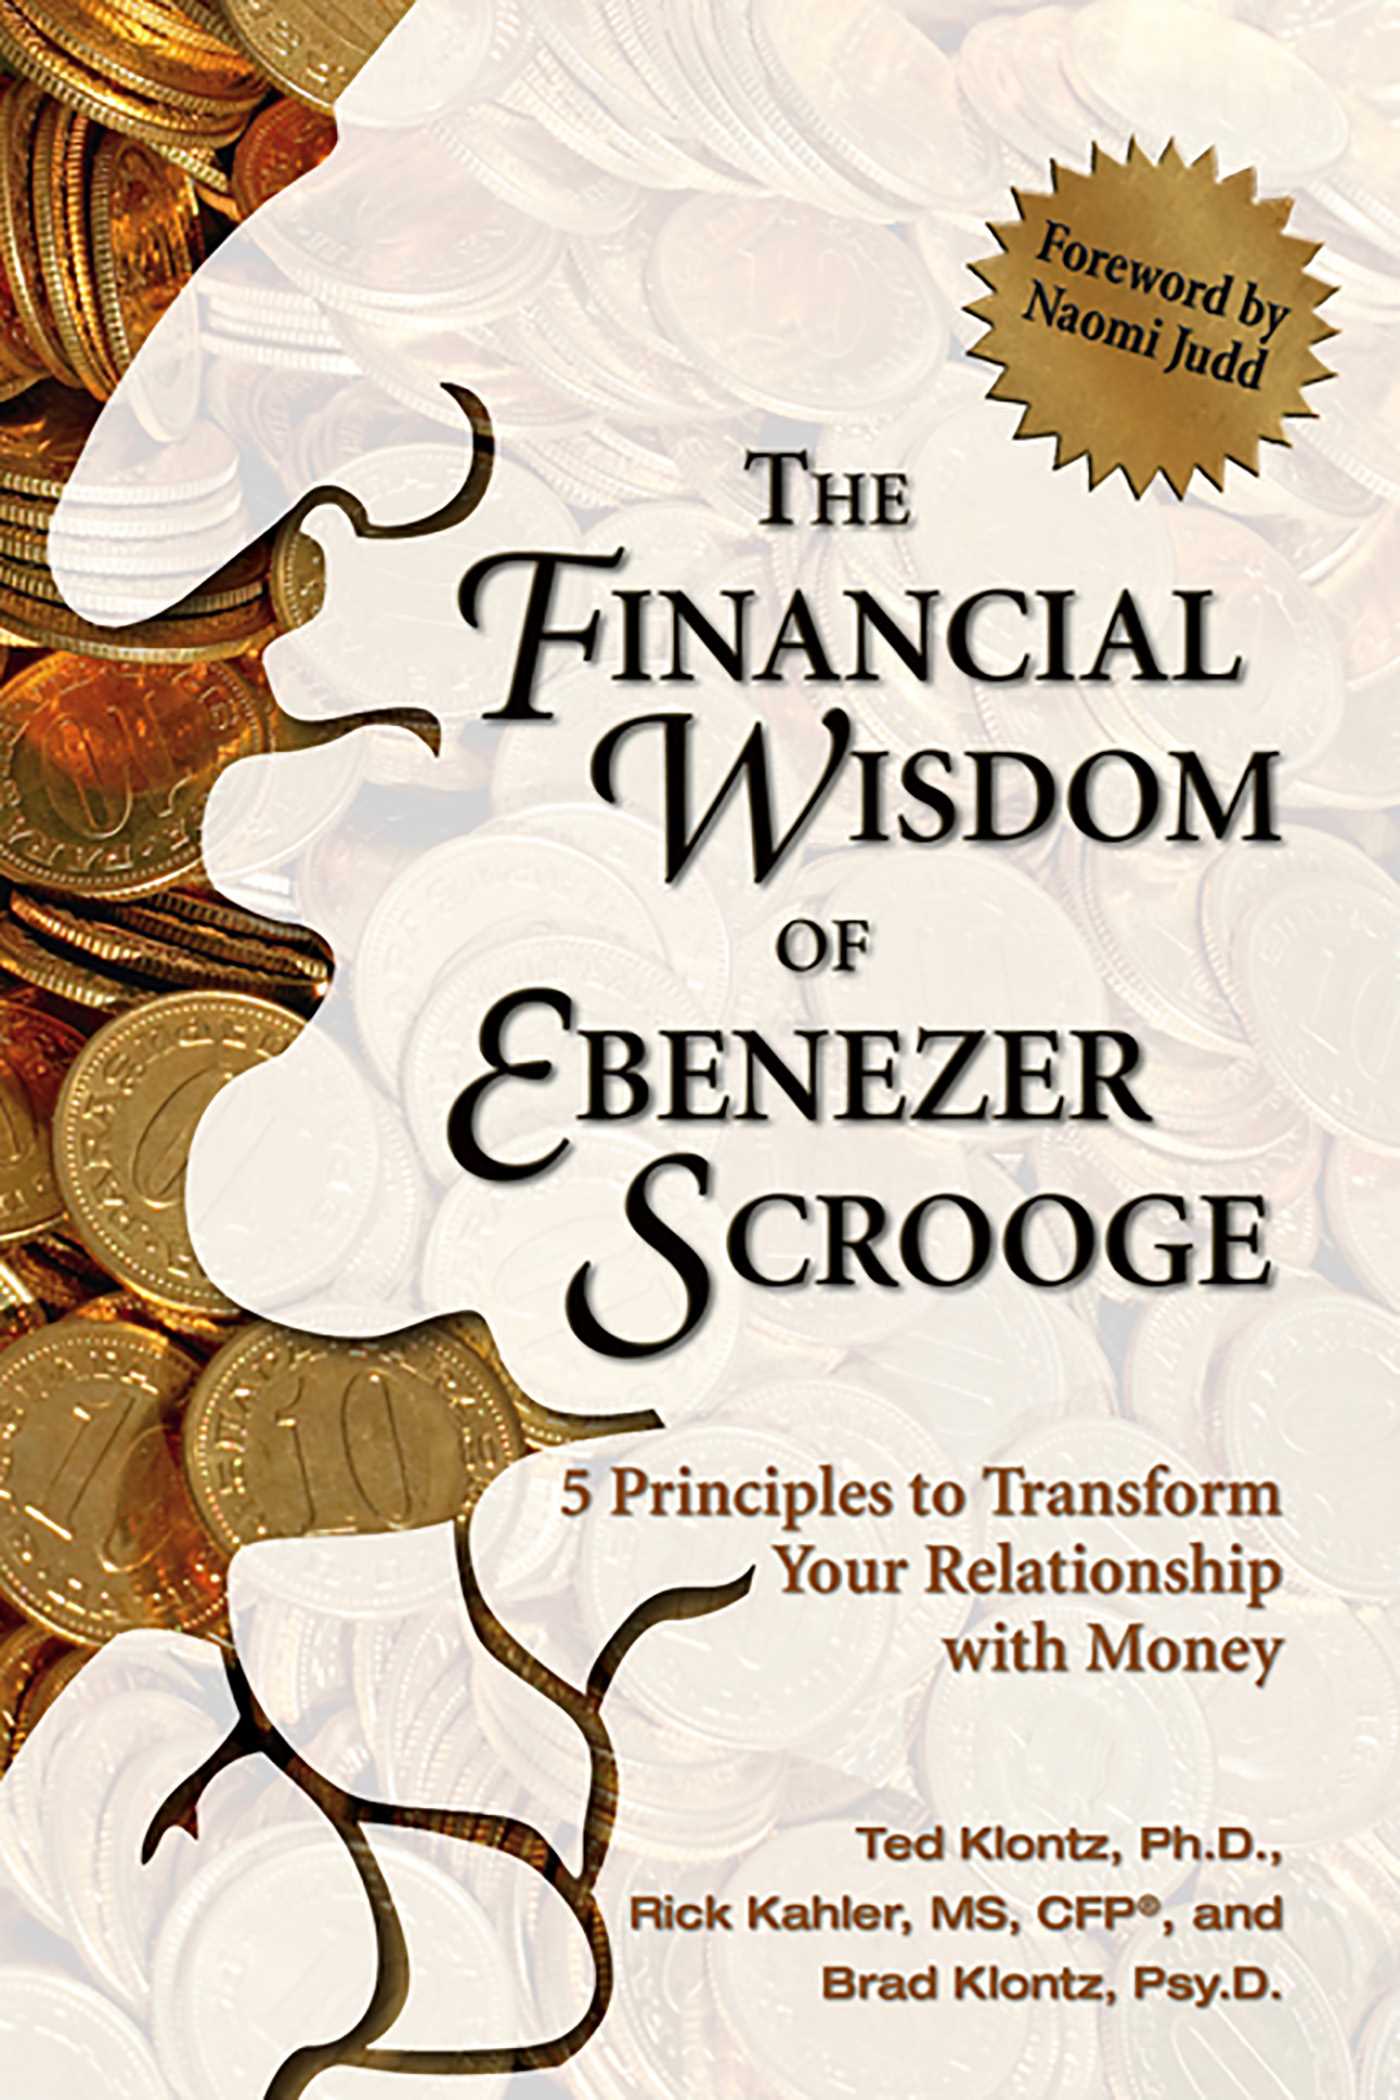 The Financial Wisdom of Ebenezer Scrooge : 5 Principles to Transform Your Relationship with Money | Klontz, Ted